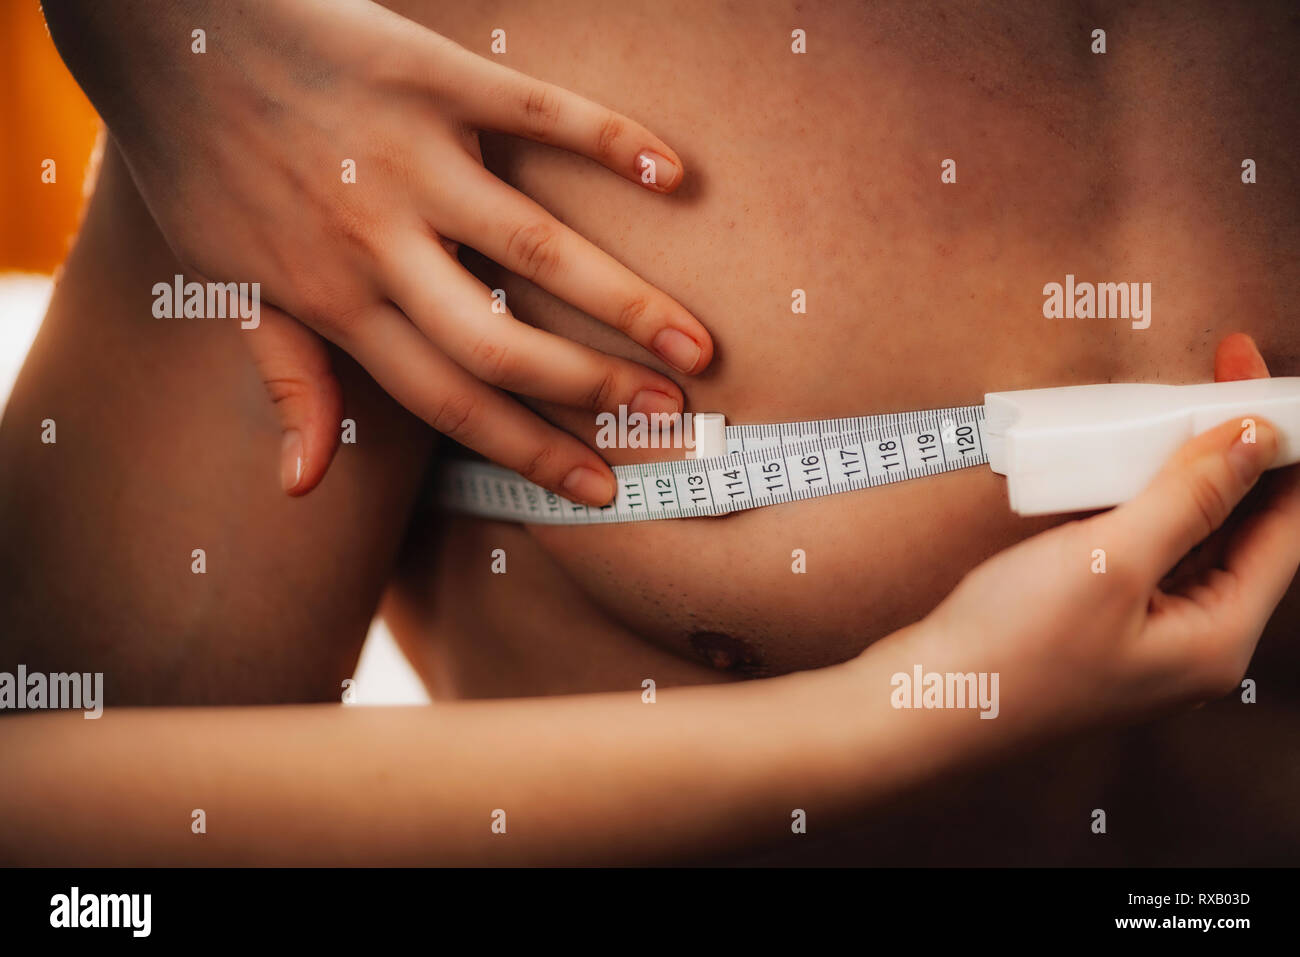 Measuring chest circumference Stock Photo